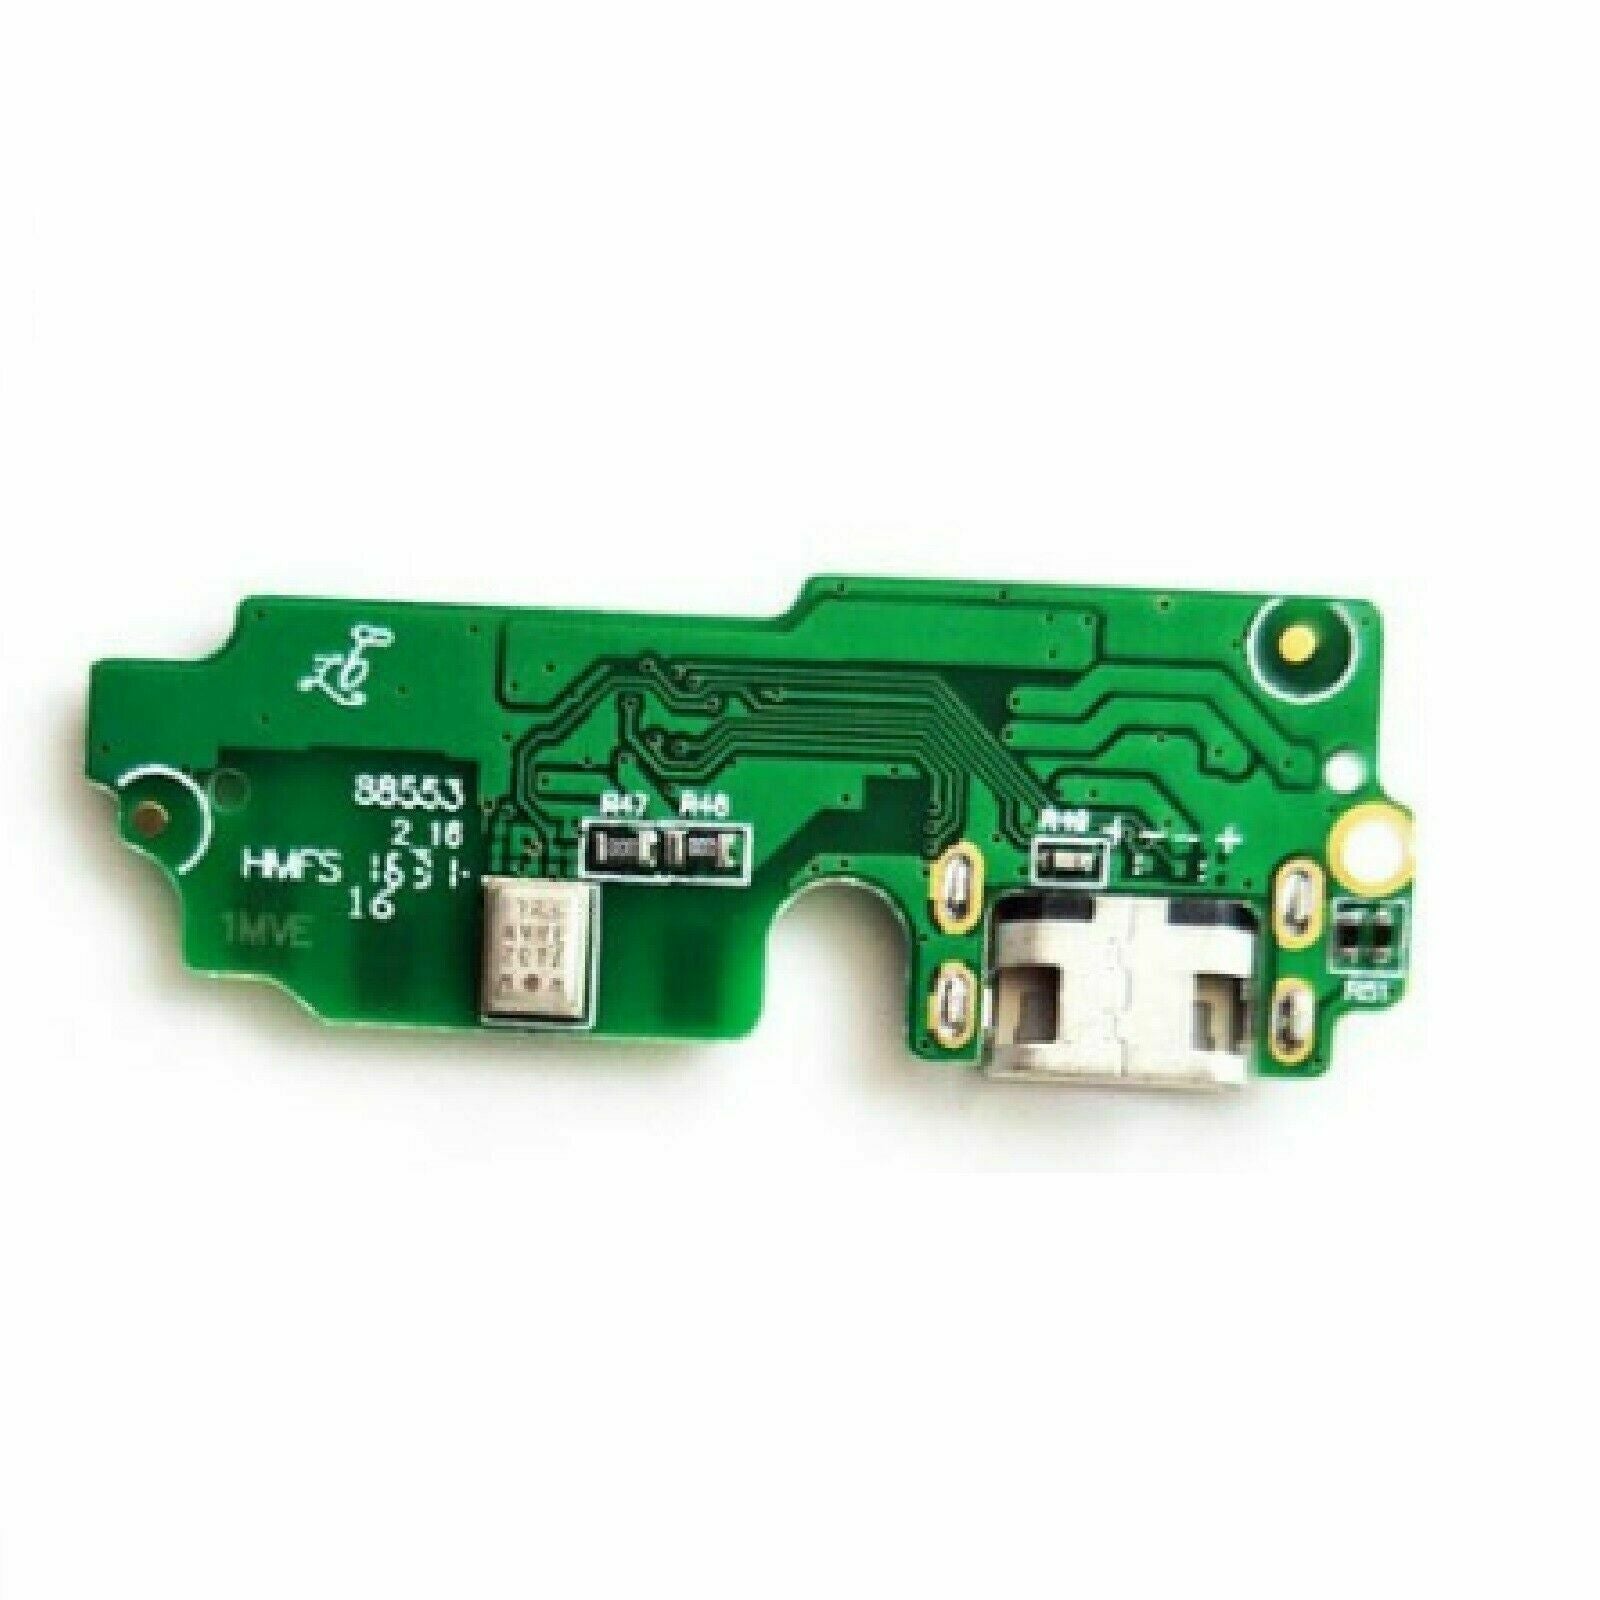 Xiaomi Redmi 4 Pro Micro USB Charging Port Board With Mic for [product_price] - First Help Tech